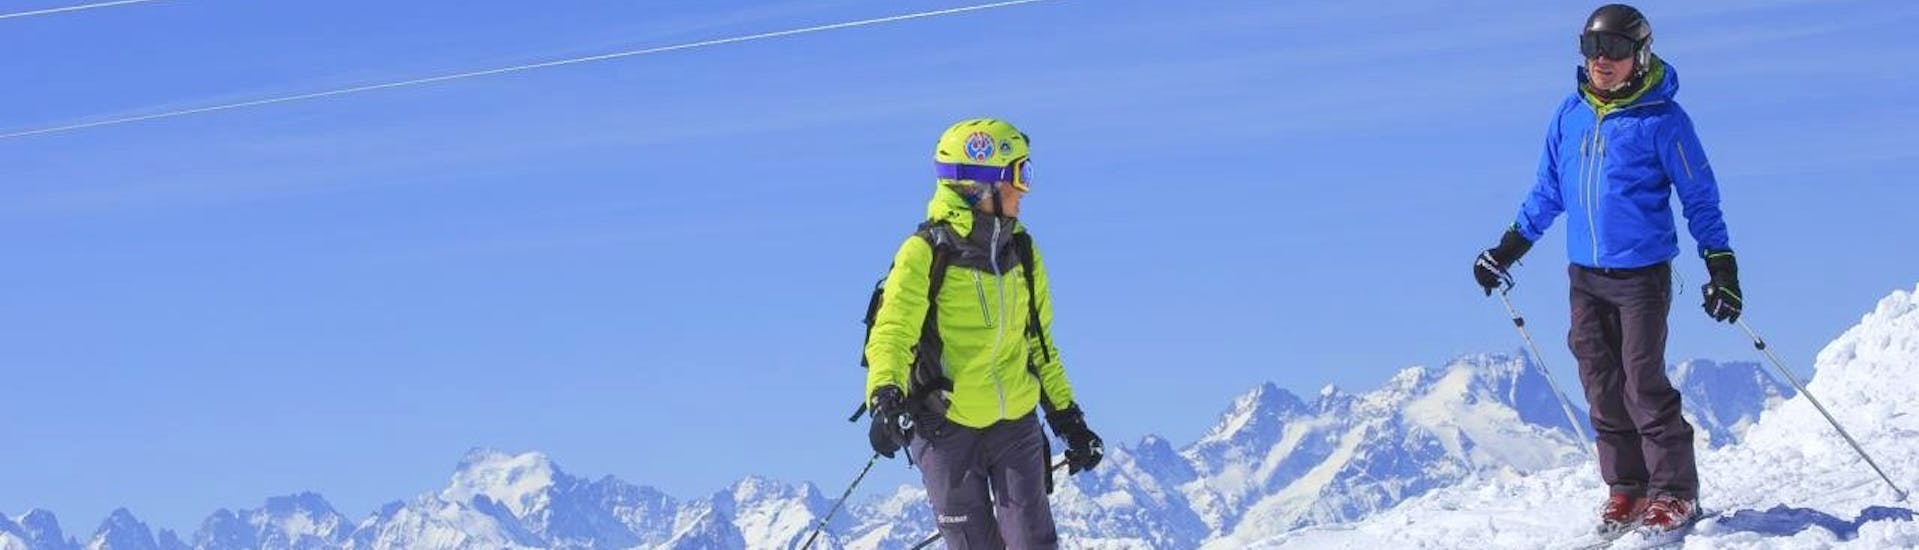 A skier is skiing with their instructor during their Private Ski Lessons for Adults for All Levels with Prosneige Méribel.